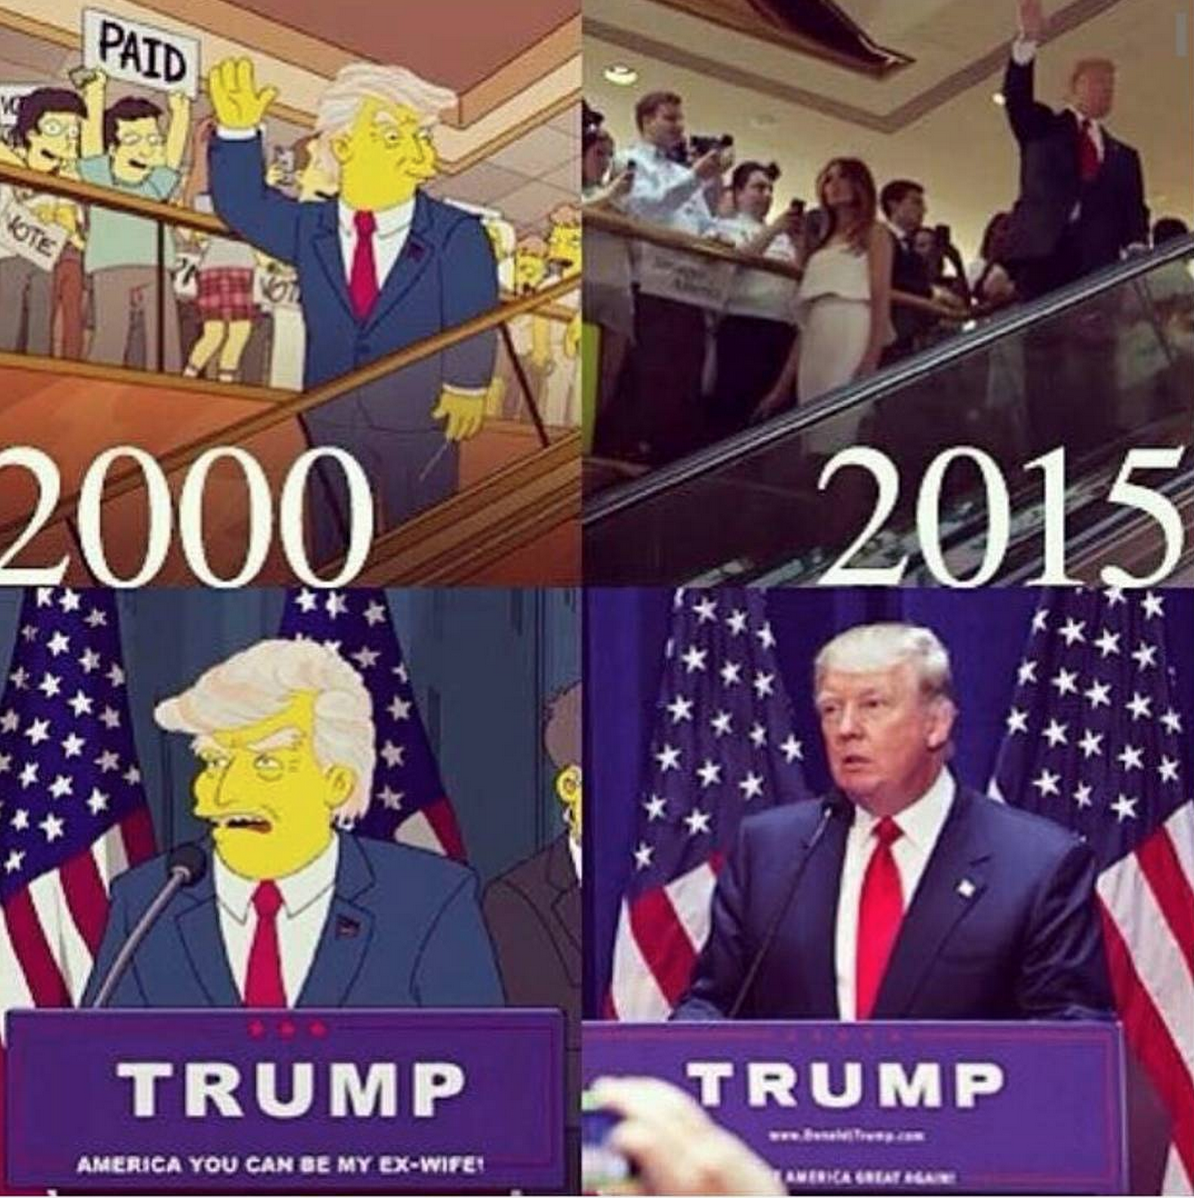 6 prophecies of the Simpsons Oracle - Donald Trump President